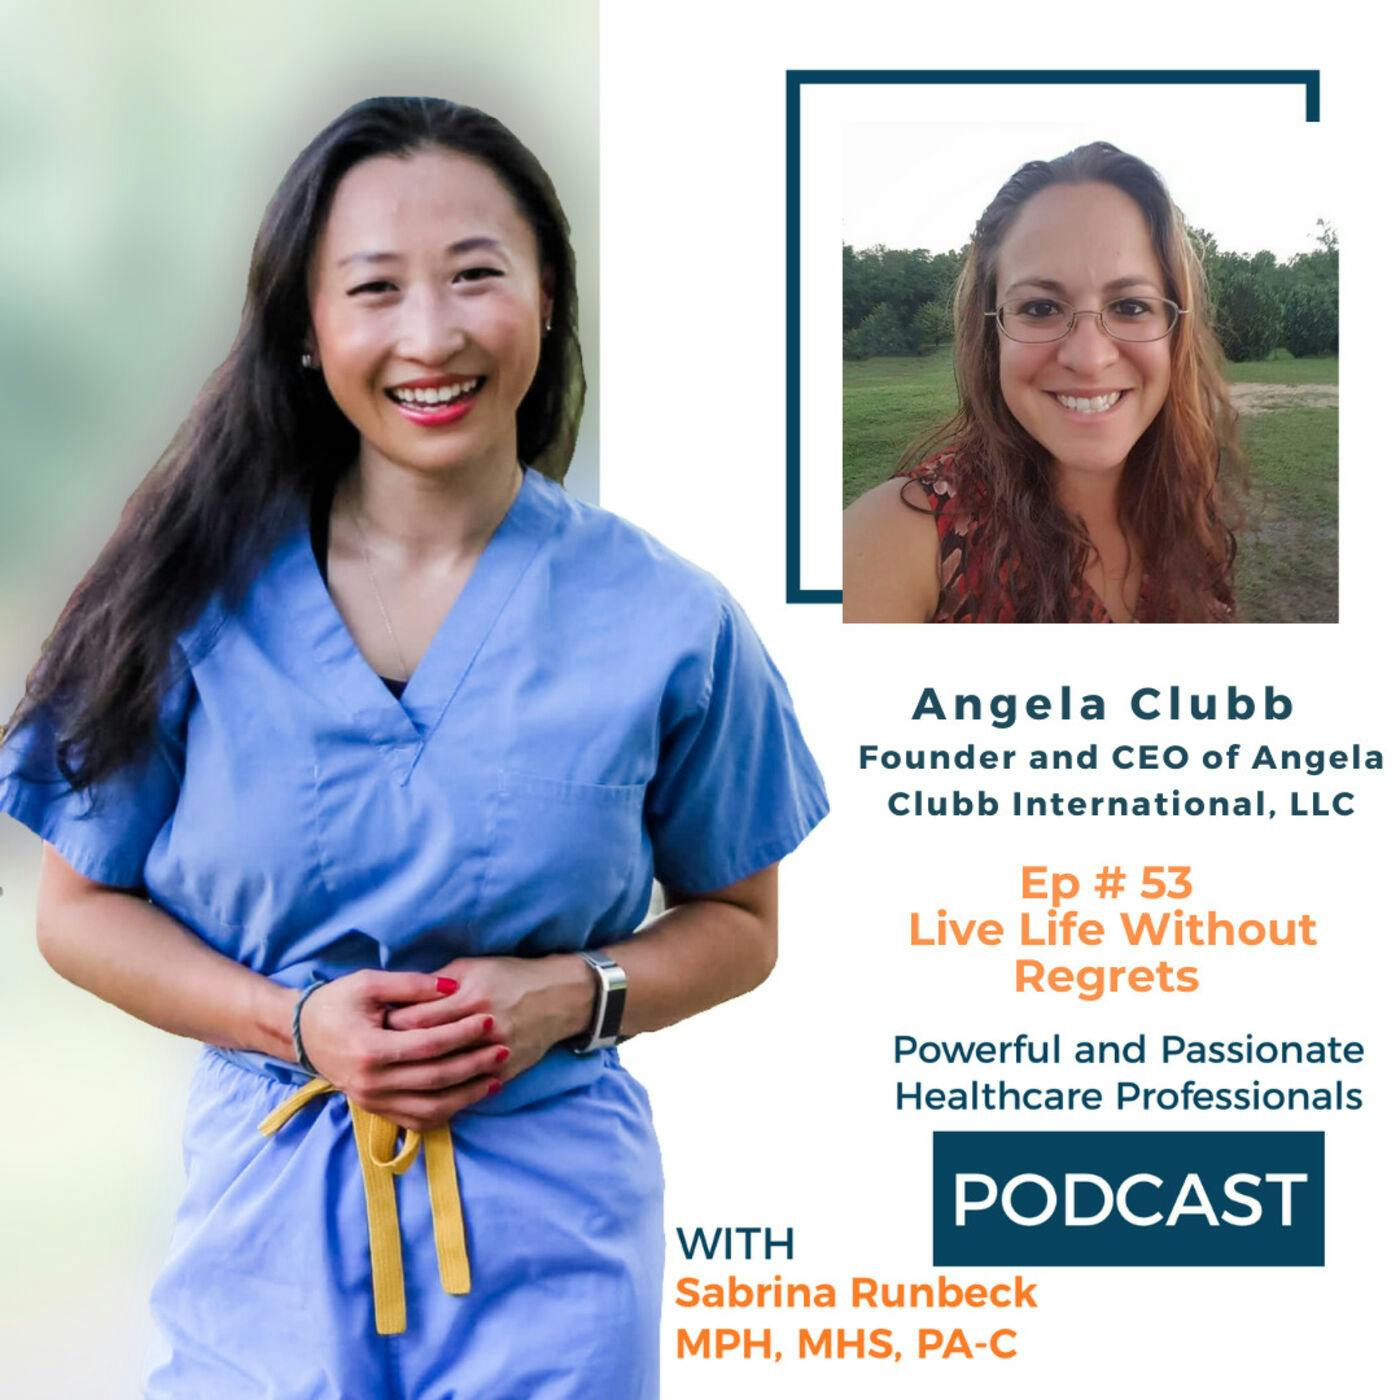 Ep 53 – Live Life Without Regrets with Angela Clubb